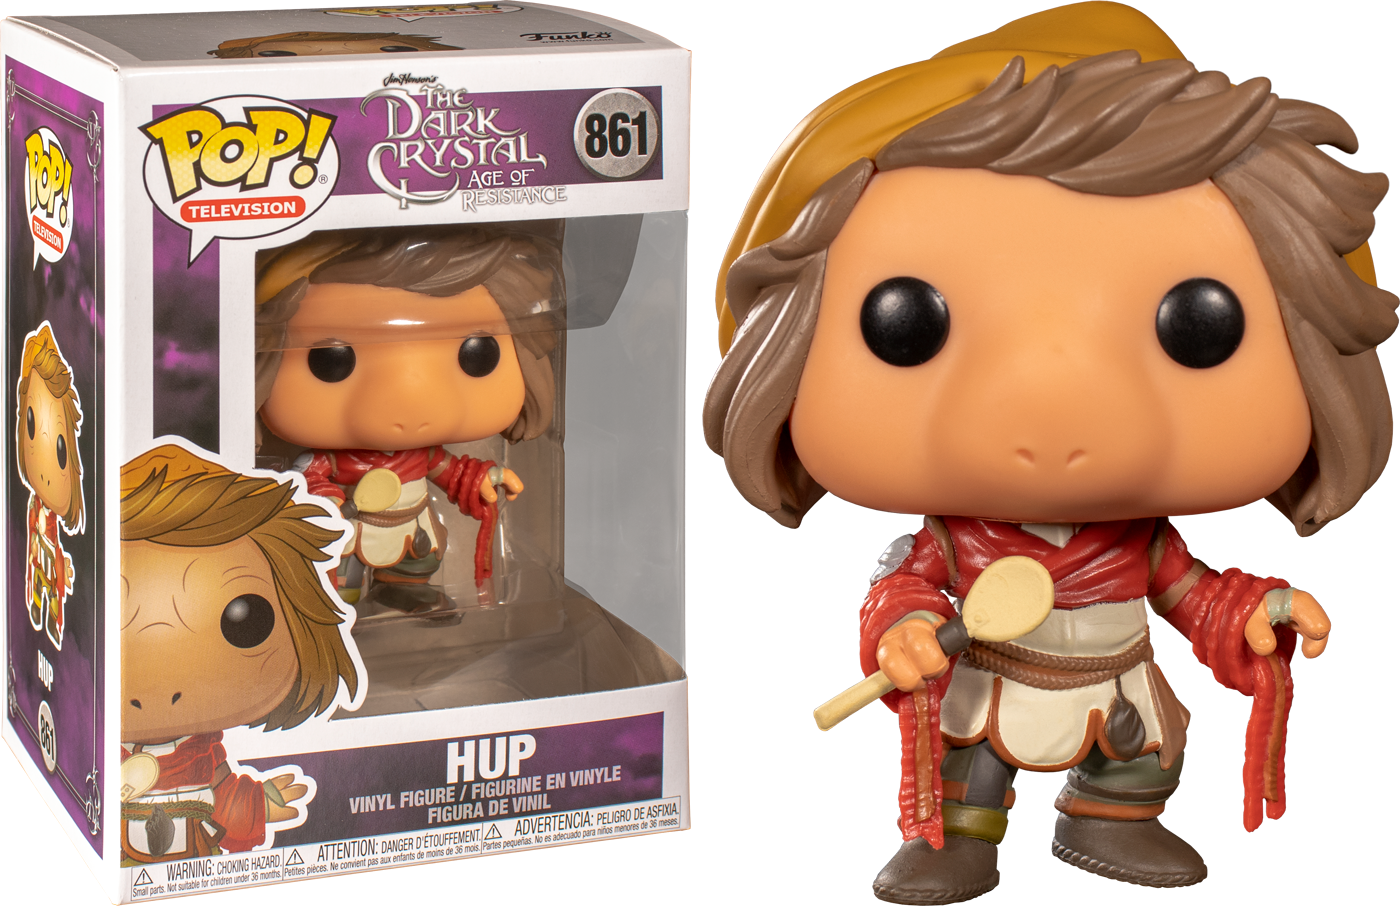 Pop! Television The Dark Crystal: Age of Resistance Vinyl Figure Hup #861